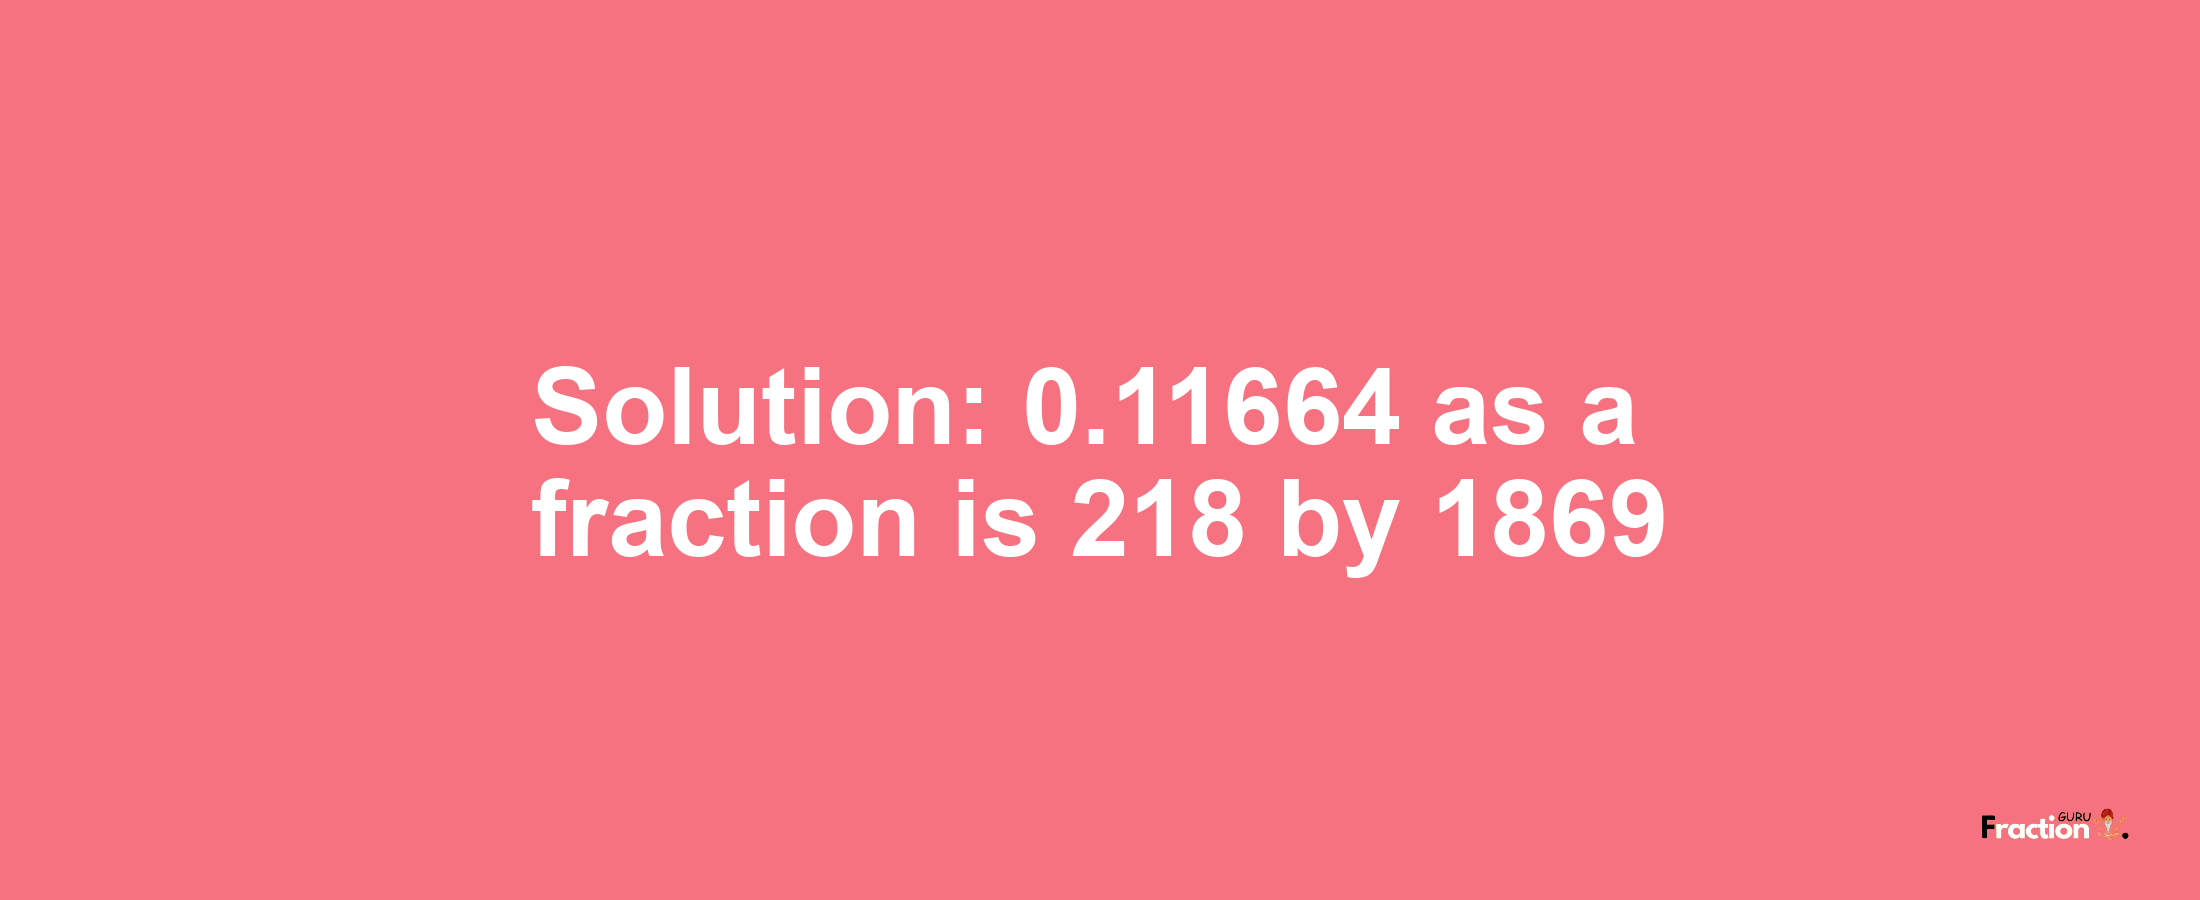 Solution:0.11664 as a fraction is 218/1869